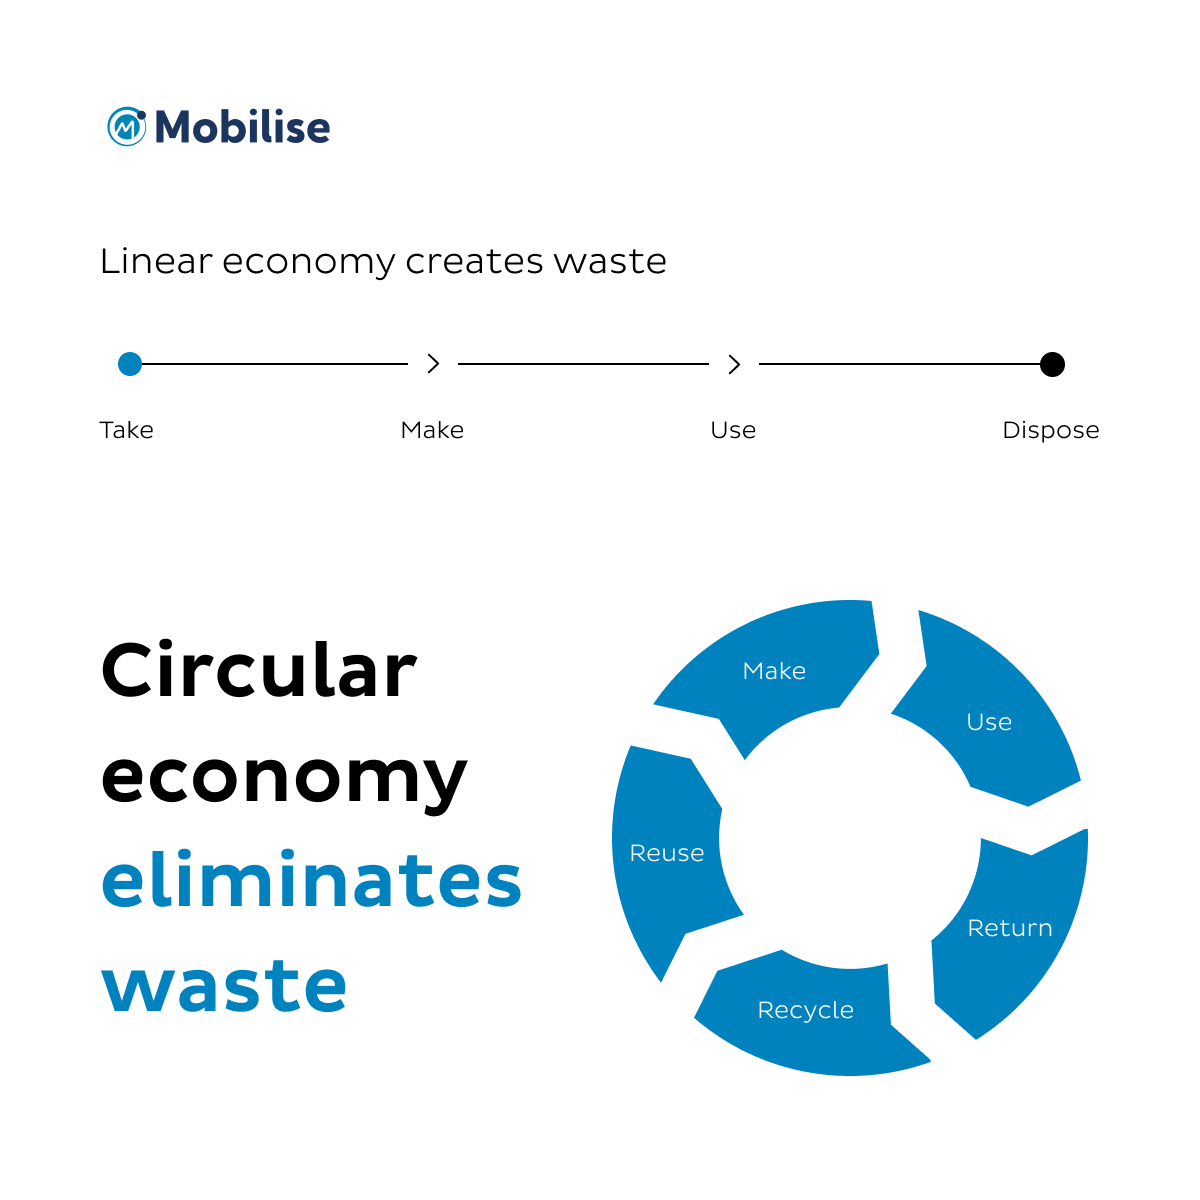 Infographic showing the differences between linear and circular economy